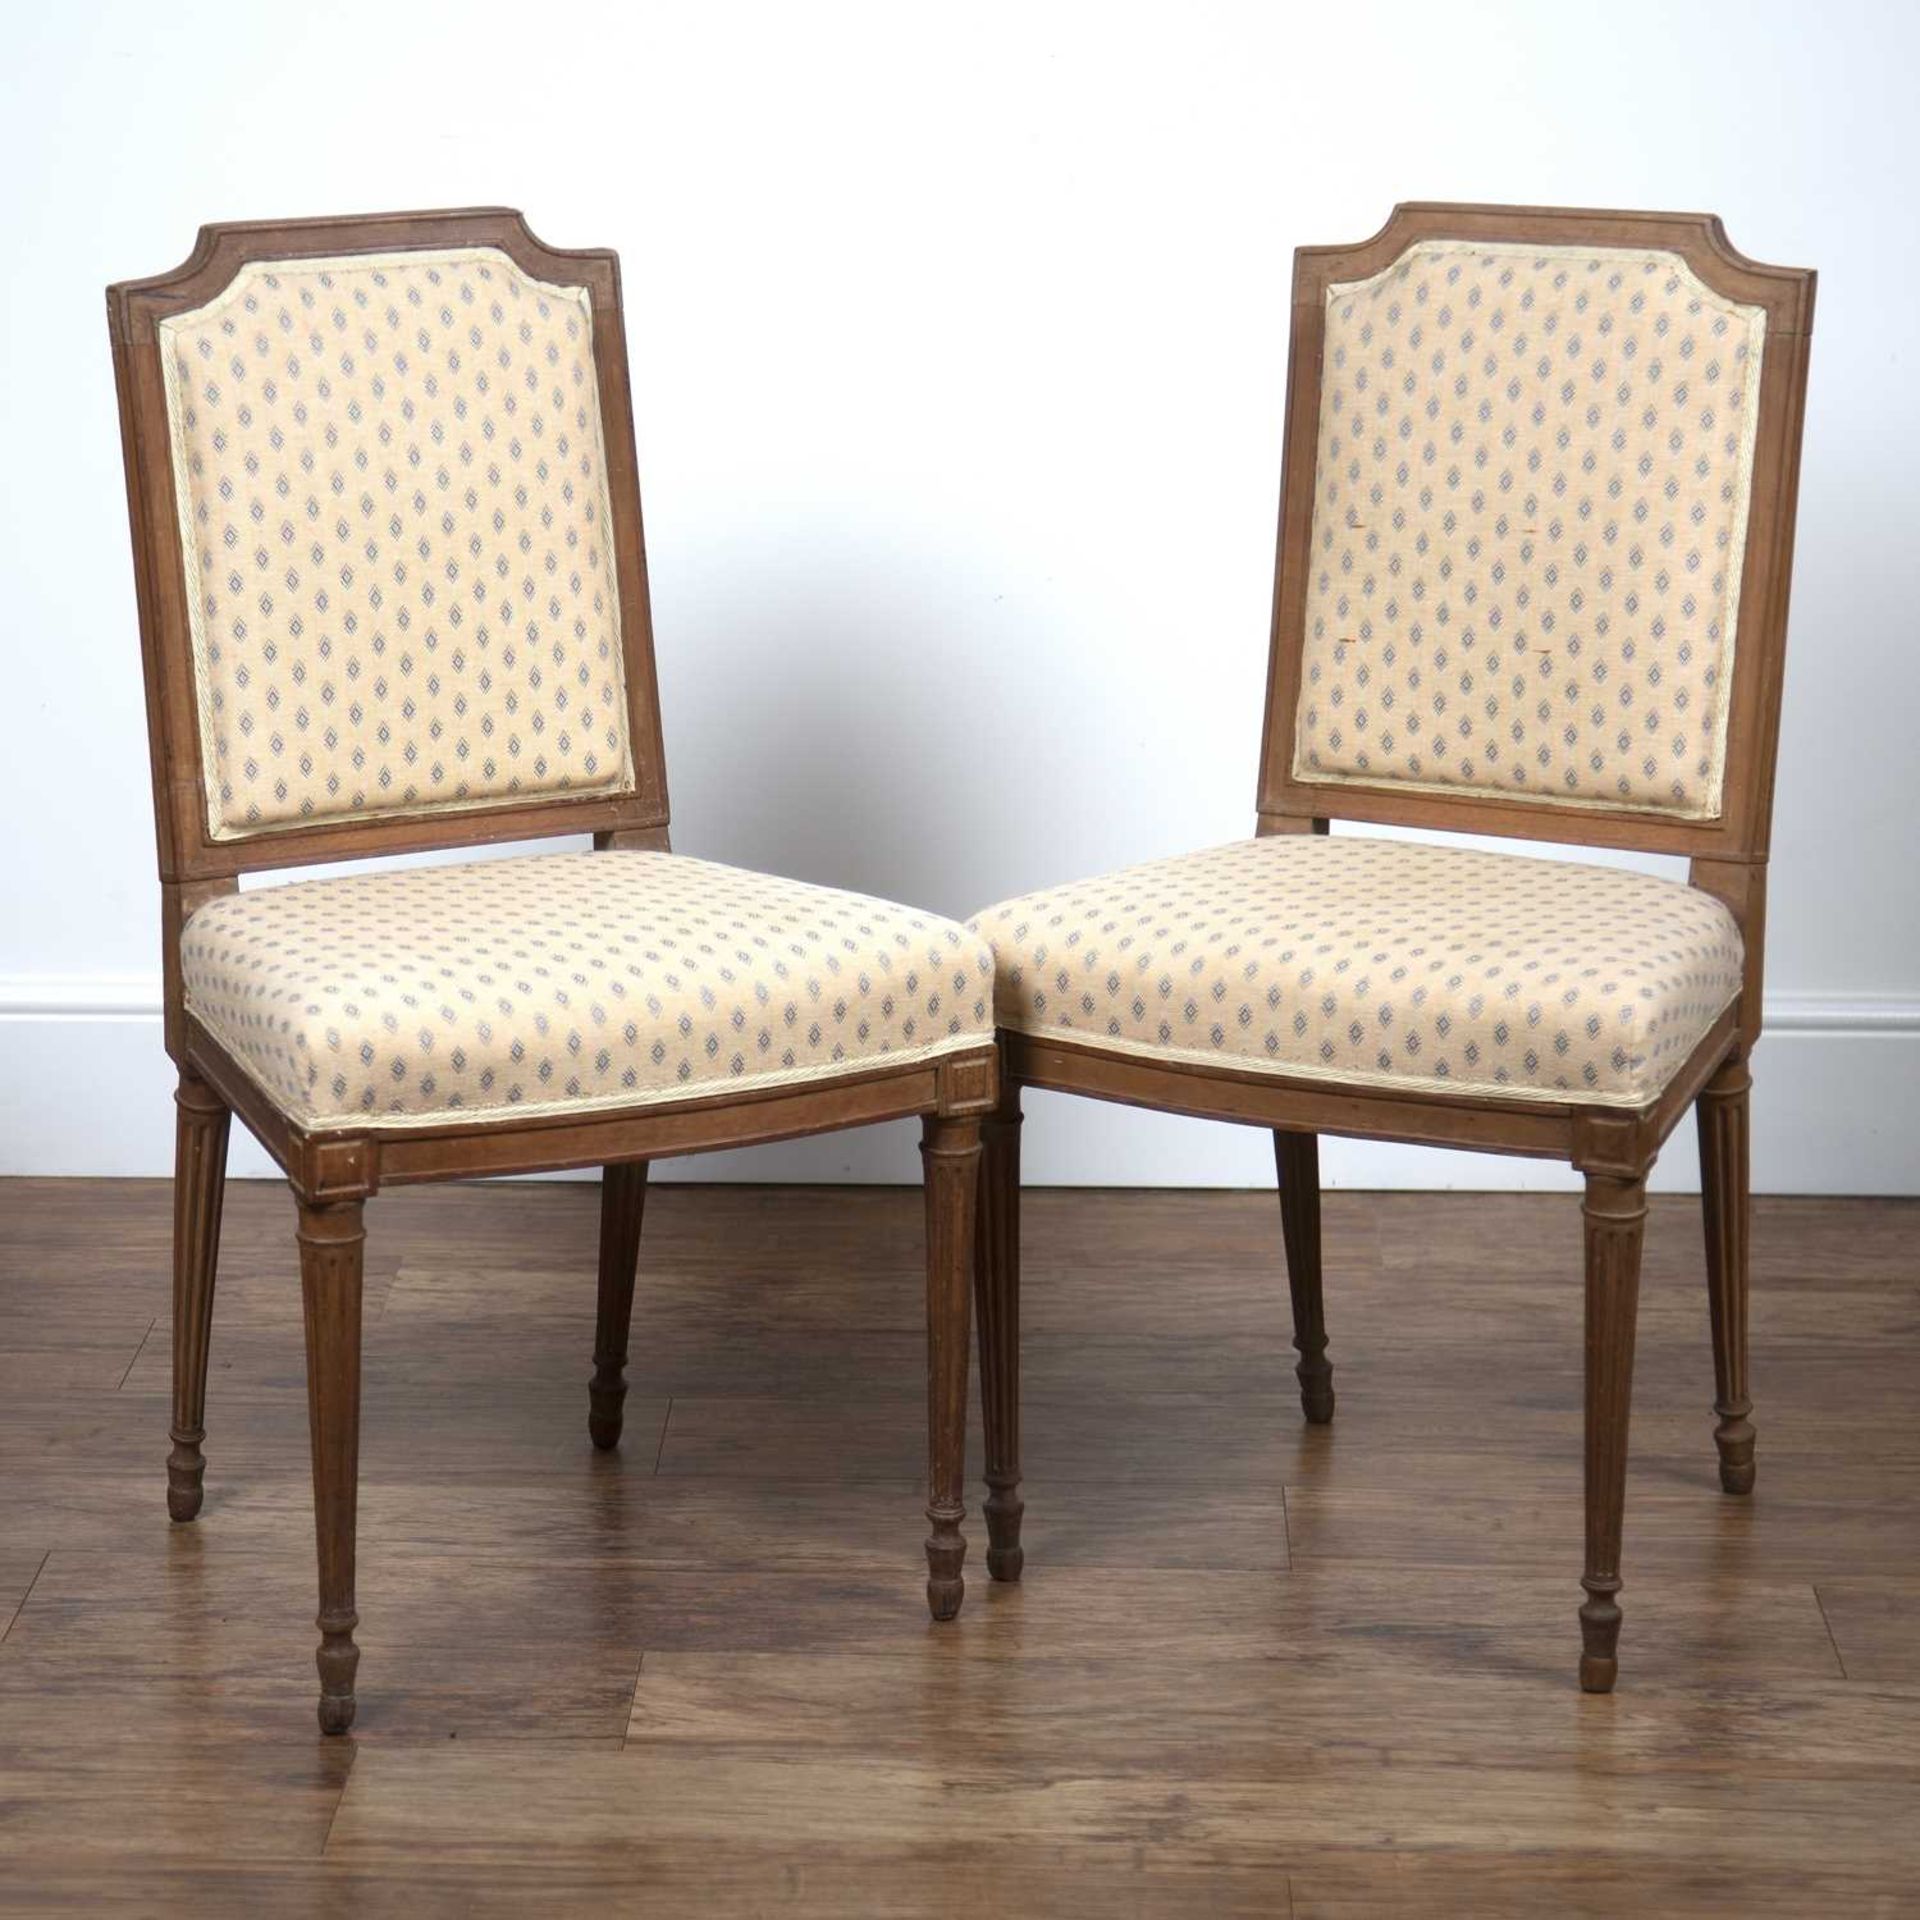 Set of four French Louis XVI style chairs with cream and blue upholstery on reeded legs, 90.5cm high - Bild 3 aus 3